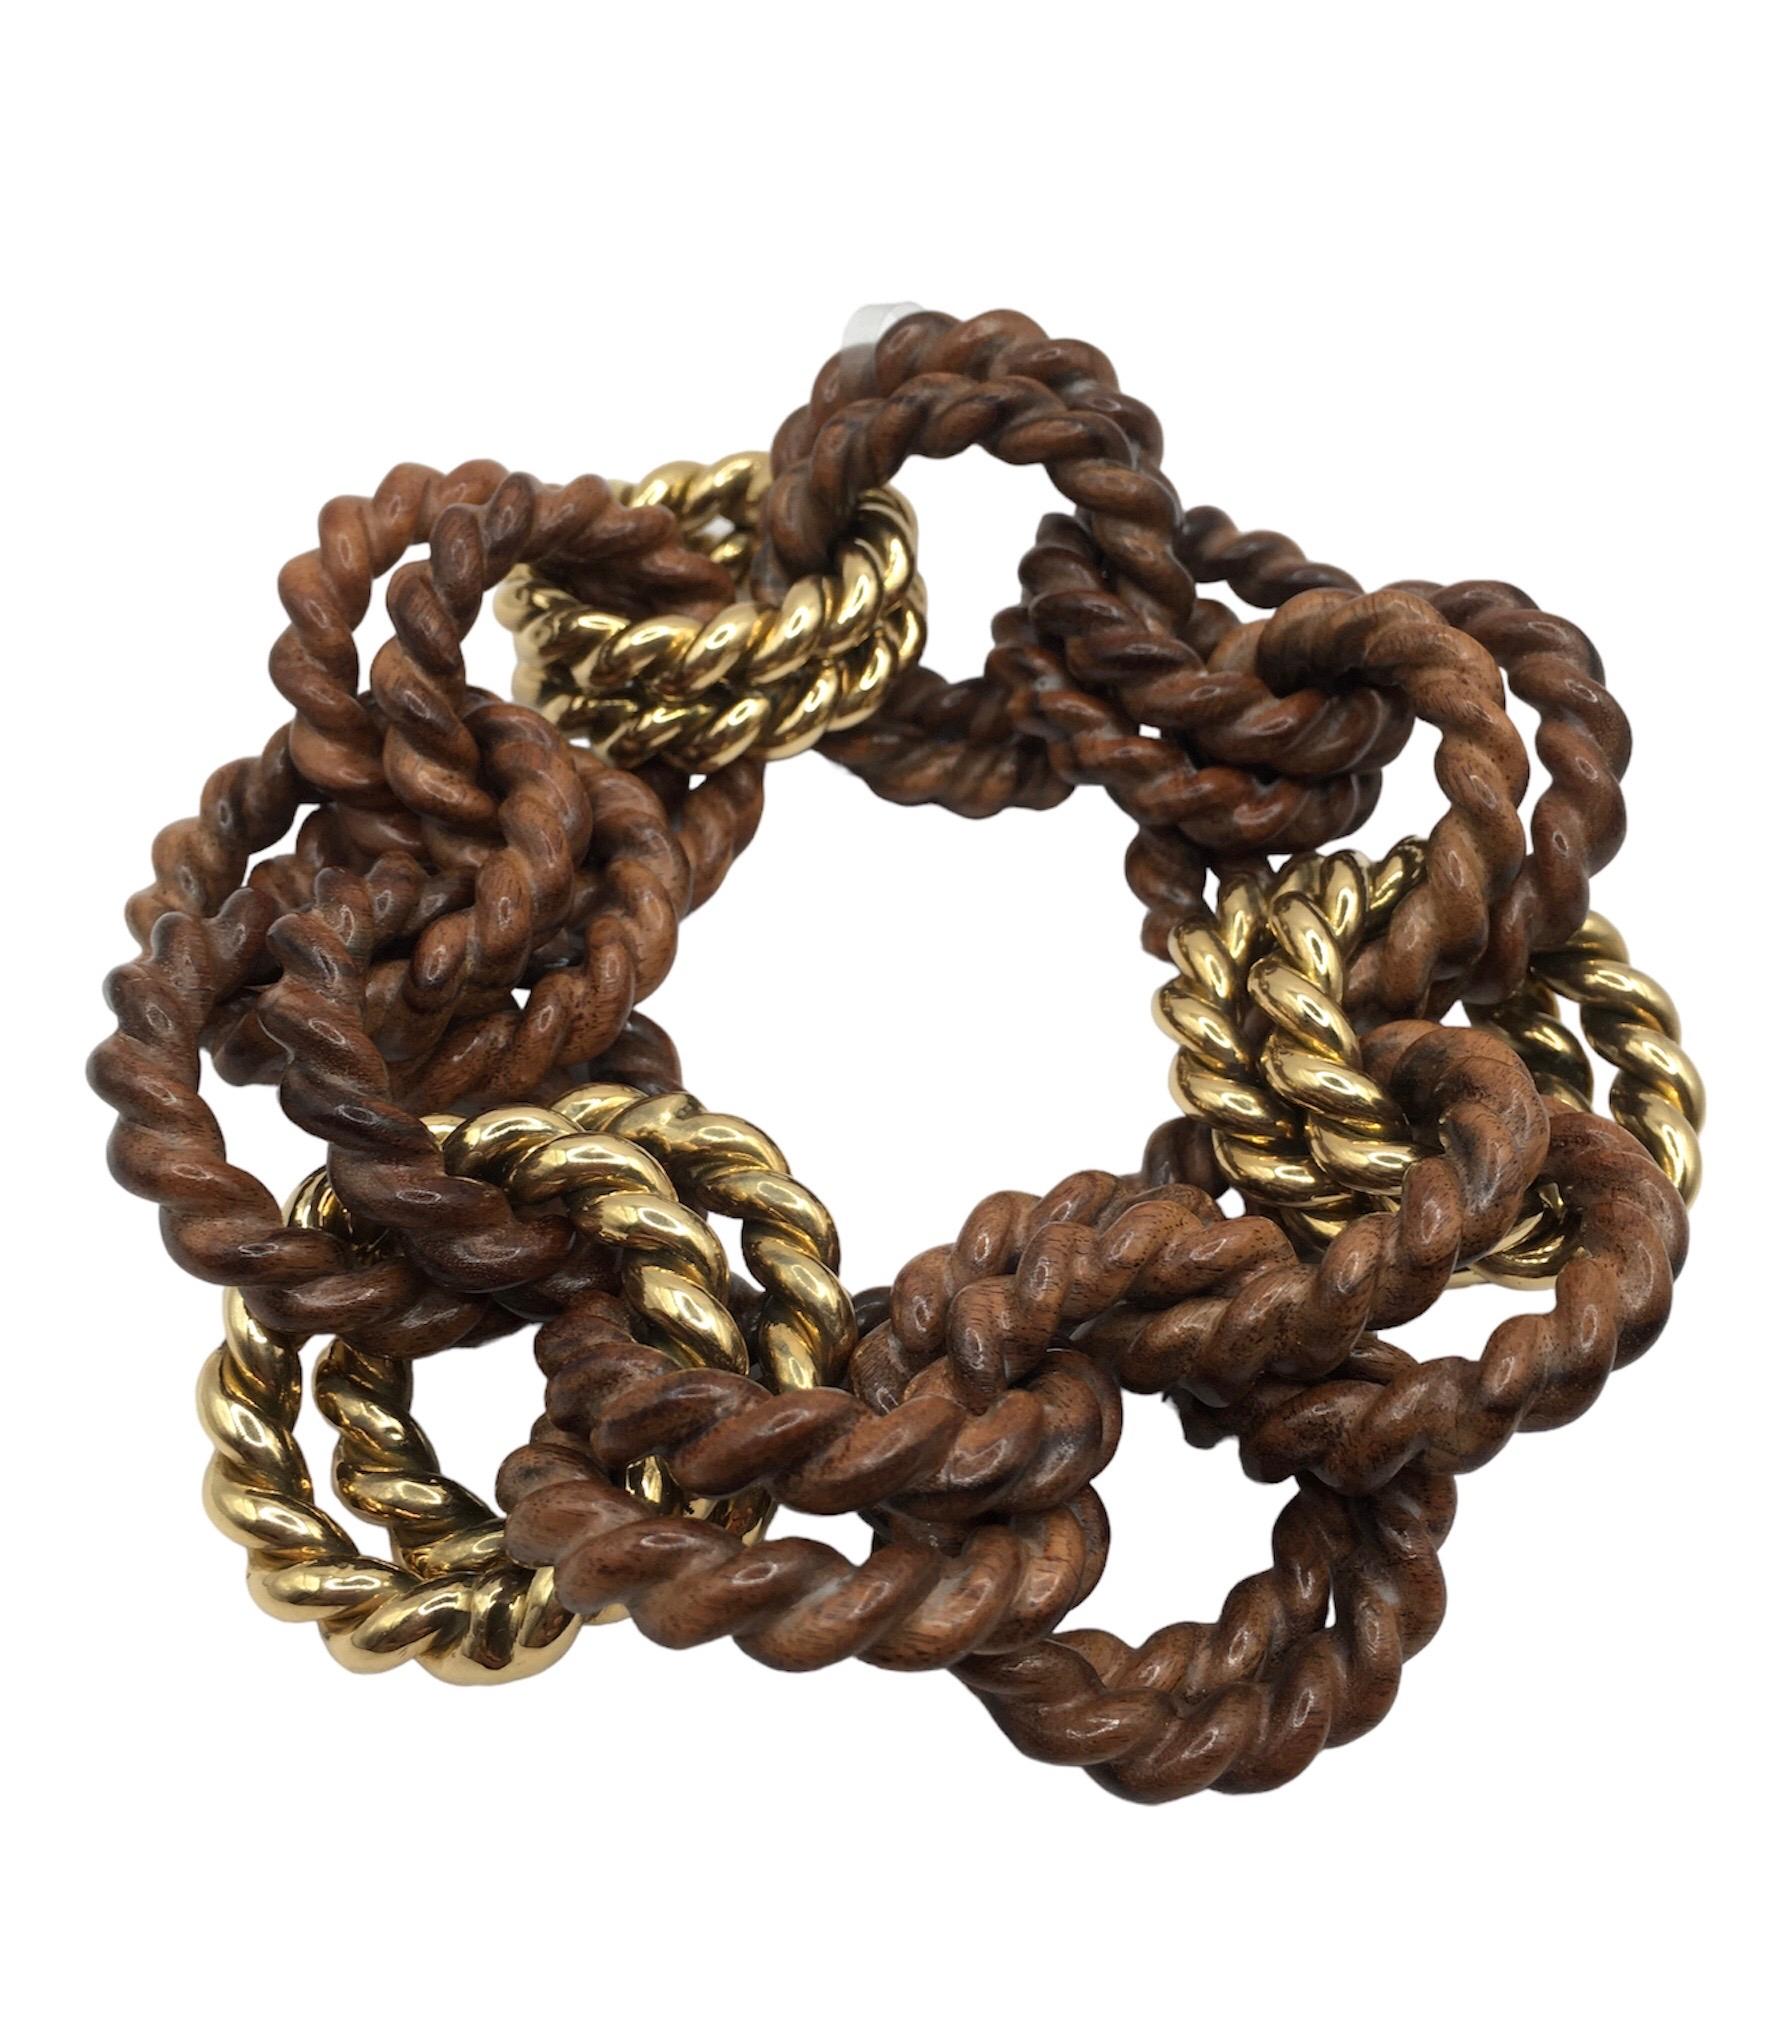 Rope links bracelet  in 18 kt  yellow gold and rose wood
This is a traditional piece  in Micheletto production

the total weight of the gold is  gr 36.40

STAMP: 10 MI ITALY 750

The full set is available